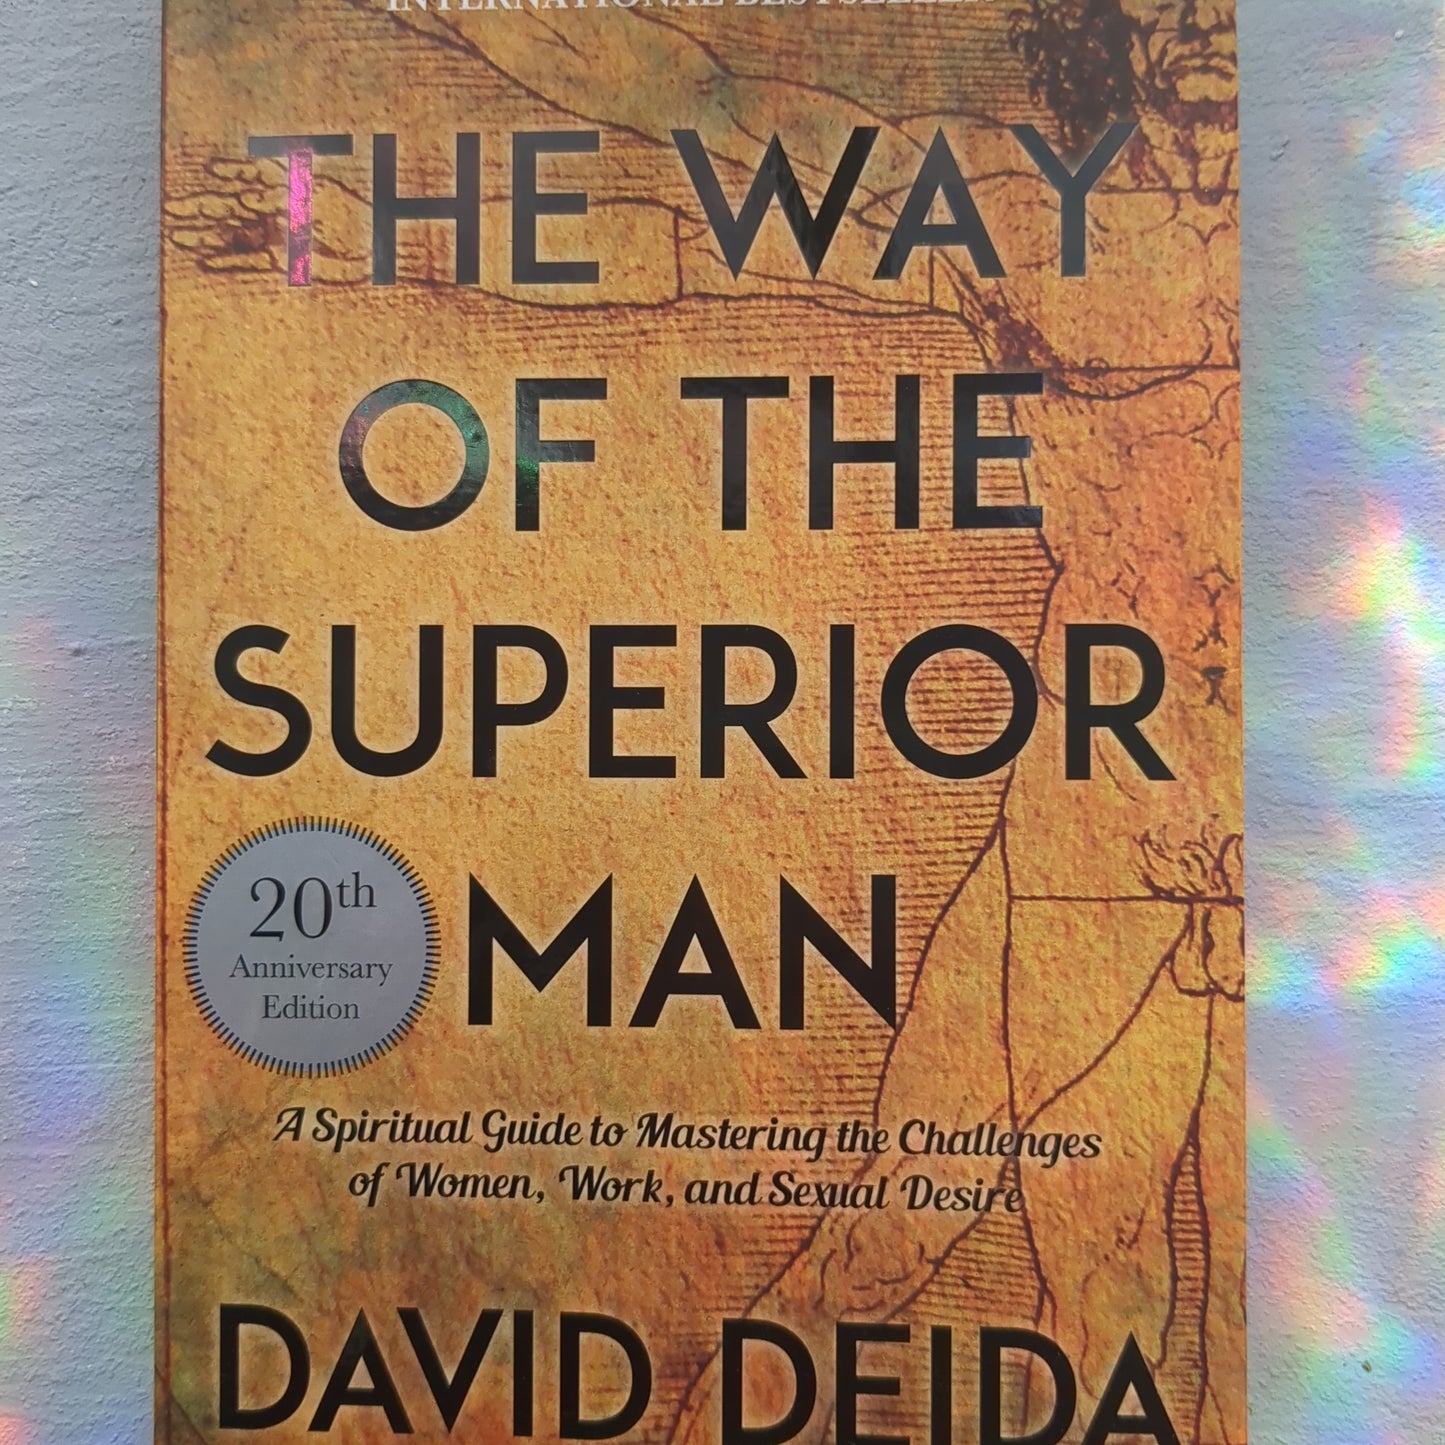 The way of the superior man a spiritual guide to mastering the challenges of women, work, and sexual desire